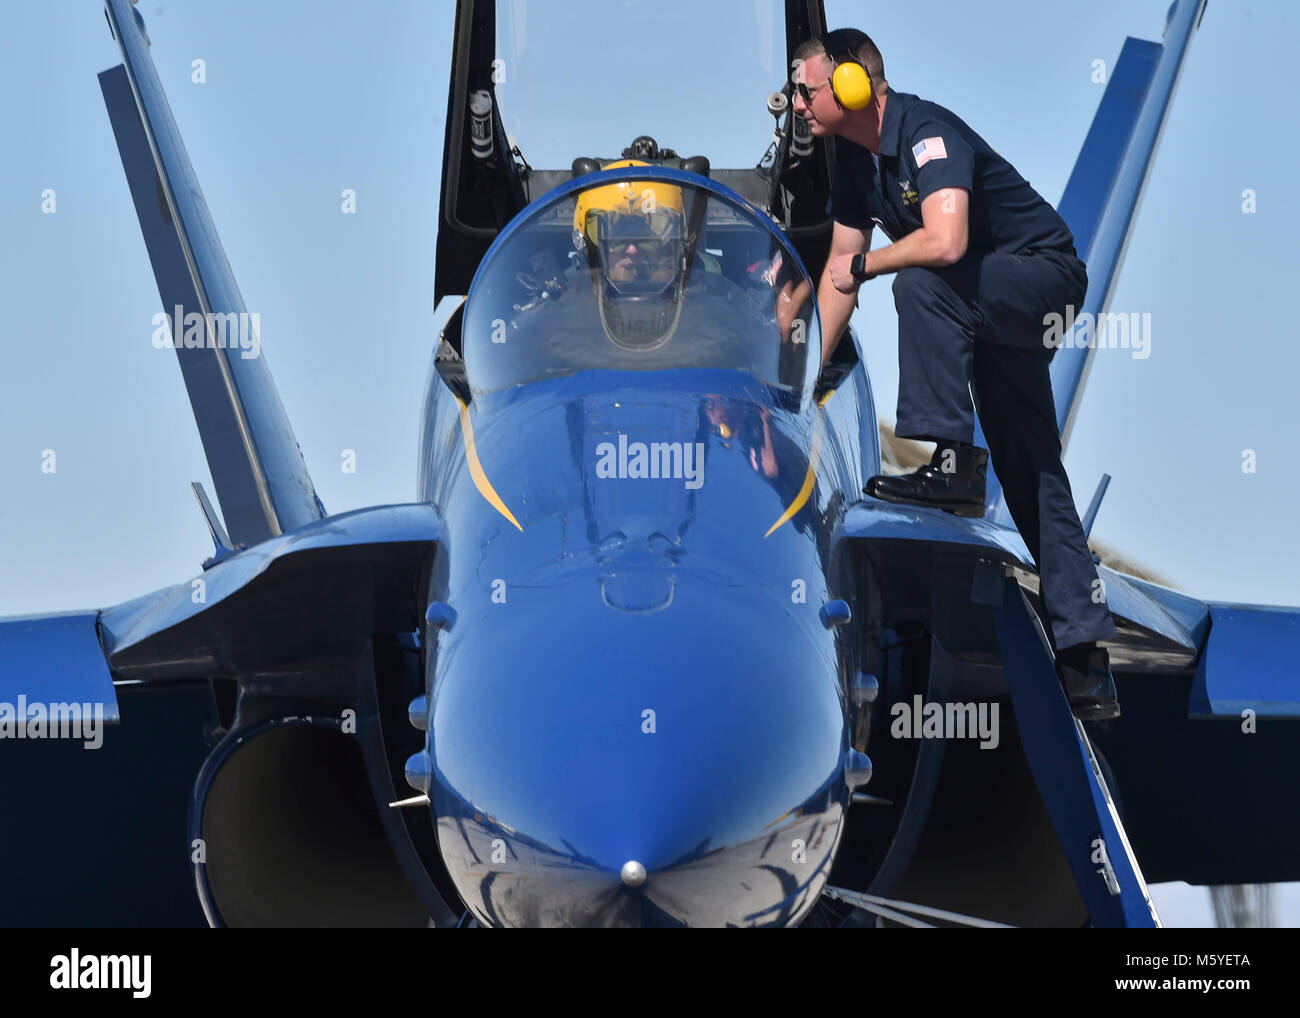 180224-N-ZC358-0721   NAF EL CENTRO, Calif. (Feb. 24, 2018) Blue Angels Crew Chief, Aviation Ordnanceman, Brandon Bates, prepares Lead Solo Pilot, Lt. Tyler Davies, for launch. The Blue Angels are scheduled to perform more than 60 demonstrations at more than 30 locations across the U.S. in 2018. (U.S. Navy photo by Mass Communication Specialist 2nd Class Jess Gray/Released) Stock Photo